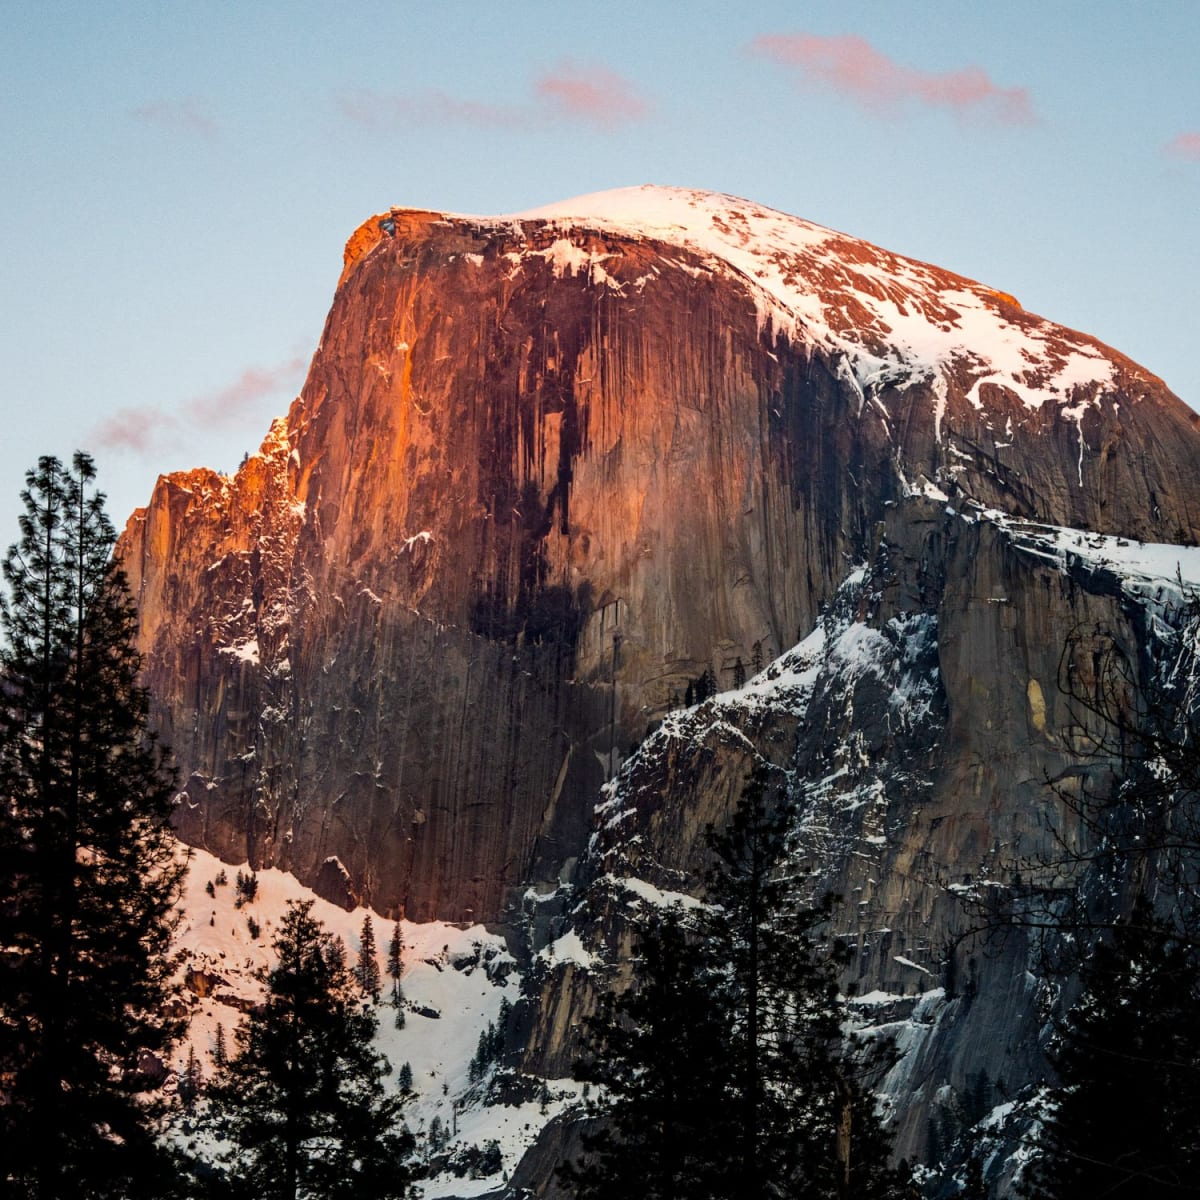 Everything You Need to Know to Hike Half Dome In a Day - Men's Journal